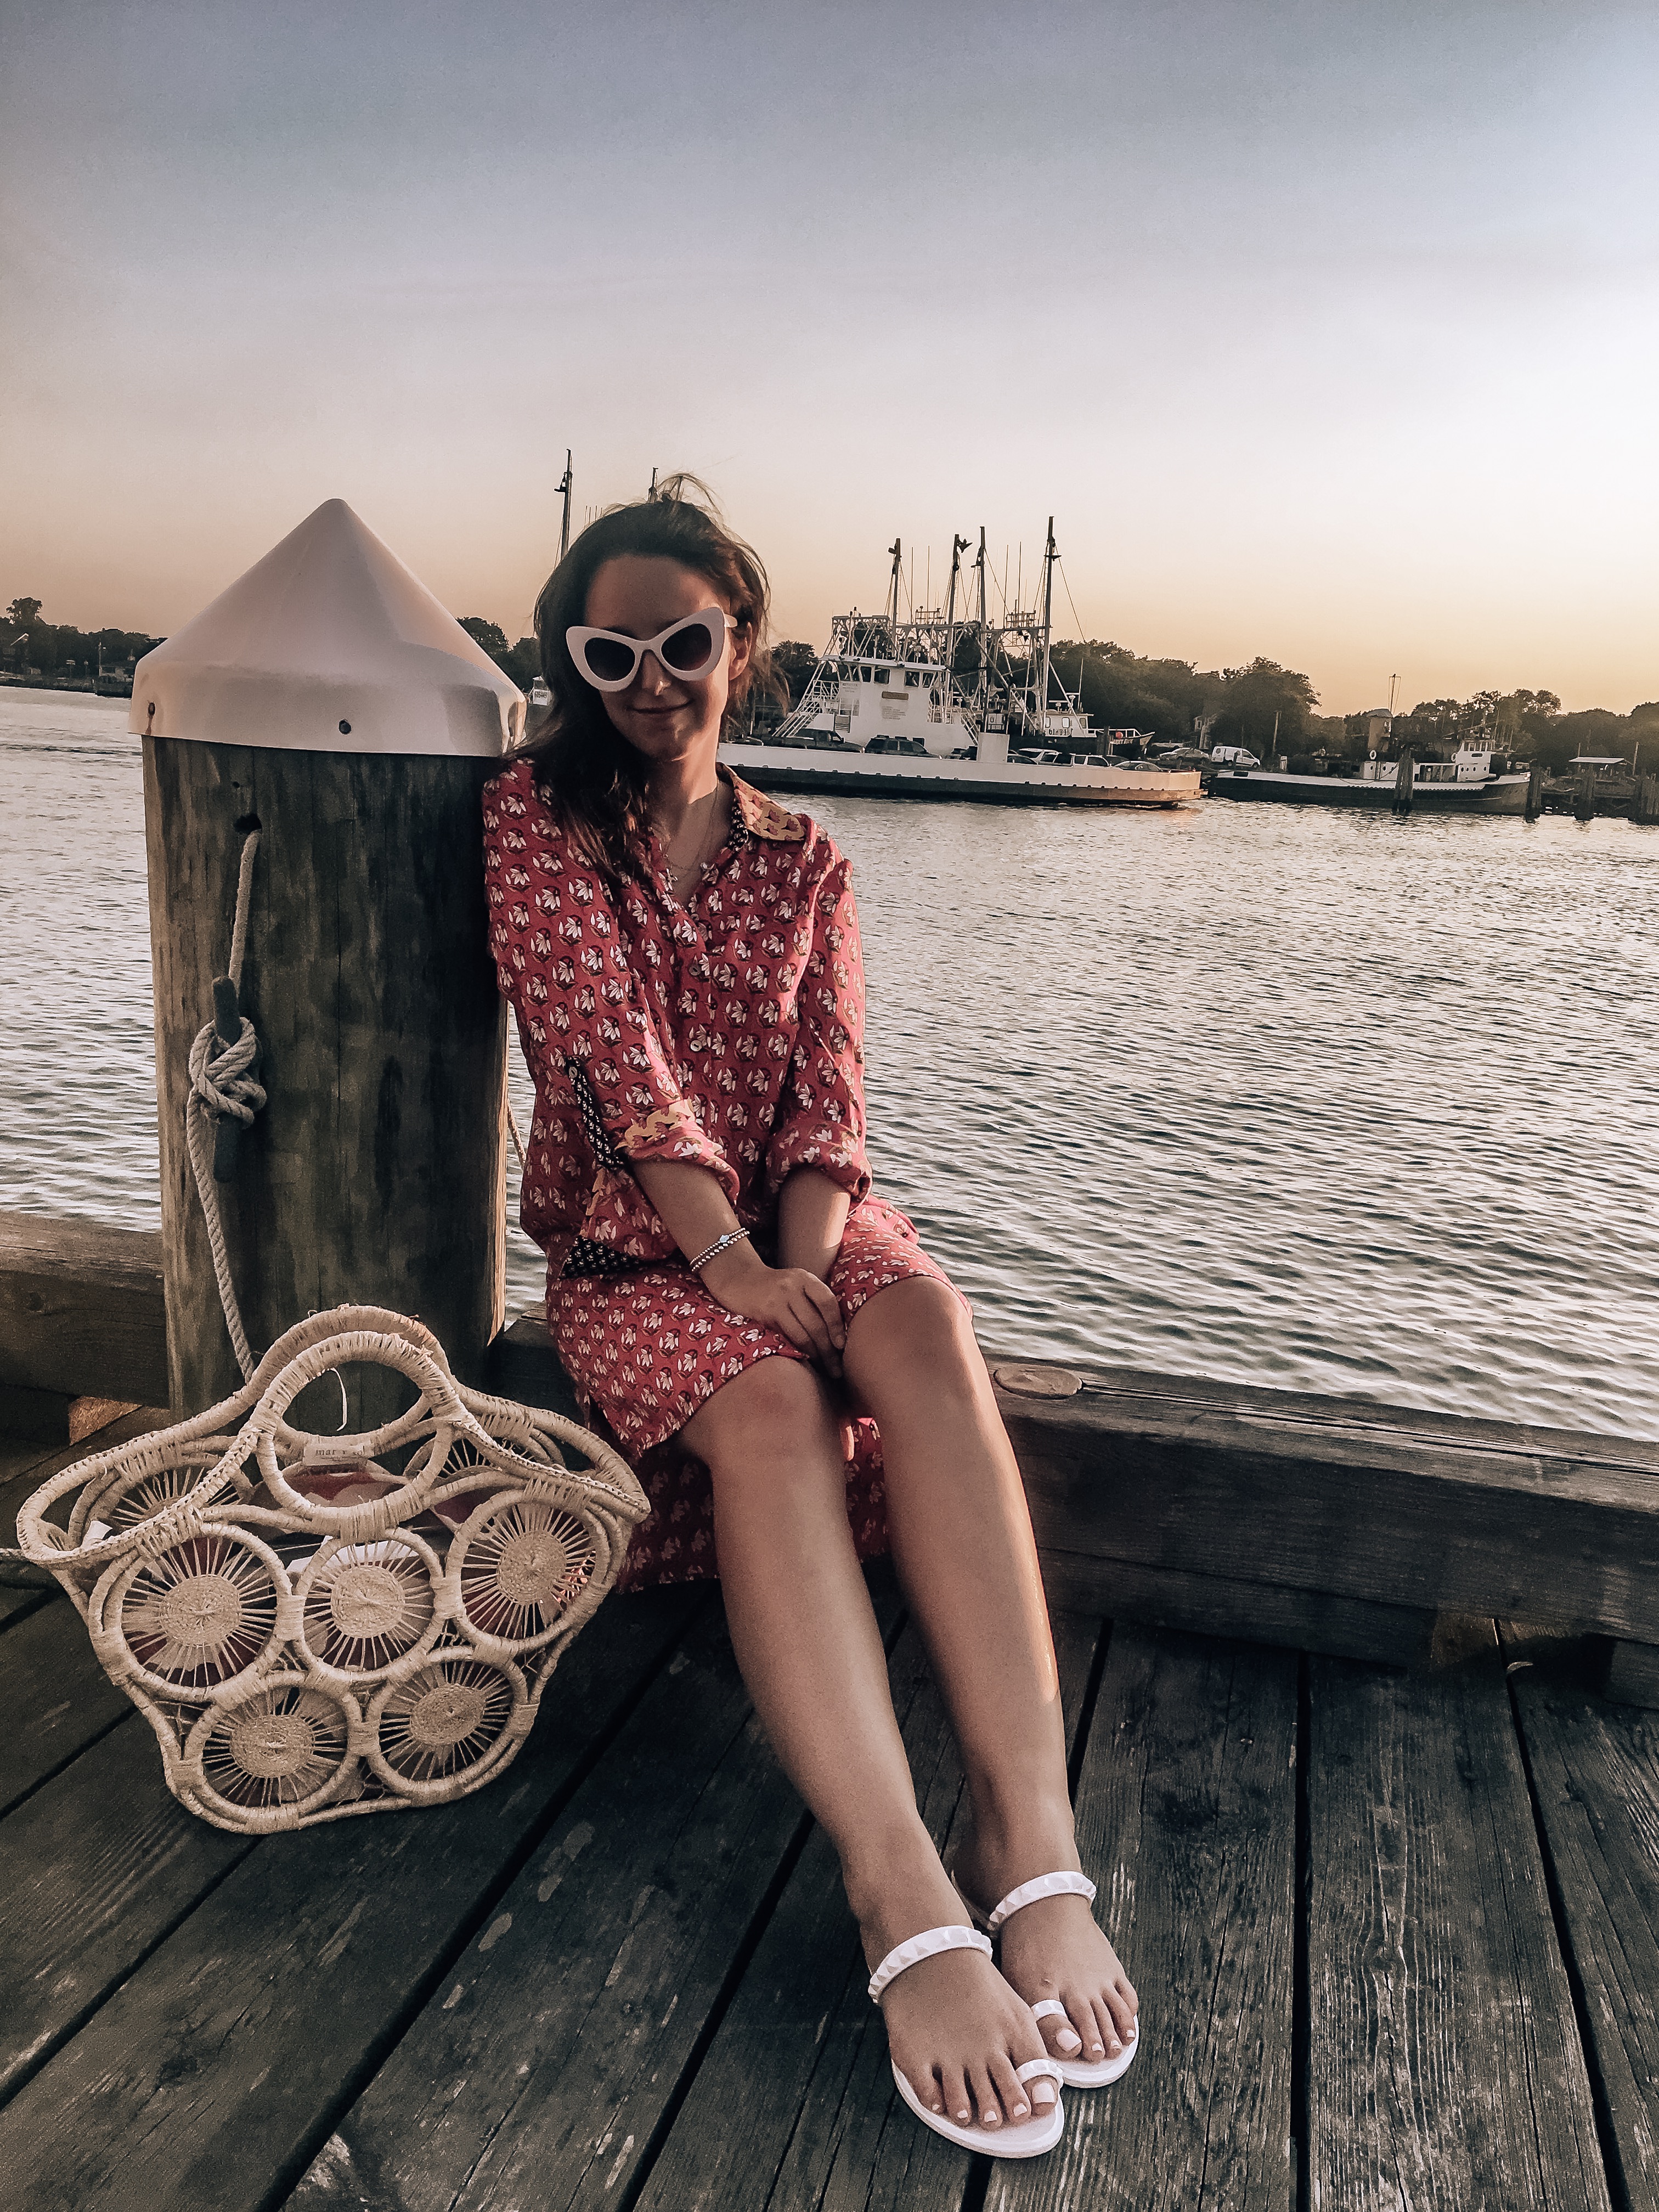 SIX B - Dock - Boats - Yachts - Top 10 Things To Do On The North Fork This Summer - An Evening in Greenport New York - North Fork - Vacation - Travel #northfork #travel #greenport #vacation #travel #travelblog #summervacation #review #outfit #summerstyle #fallstyle